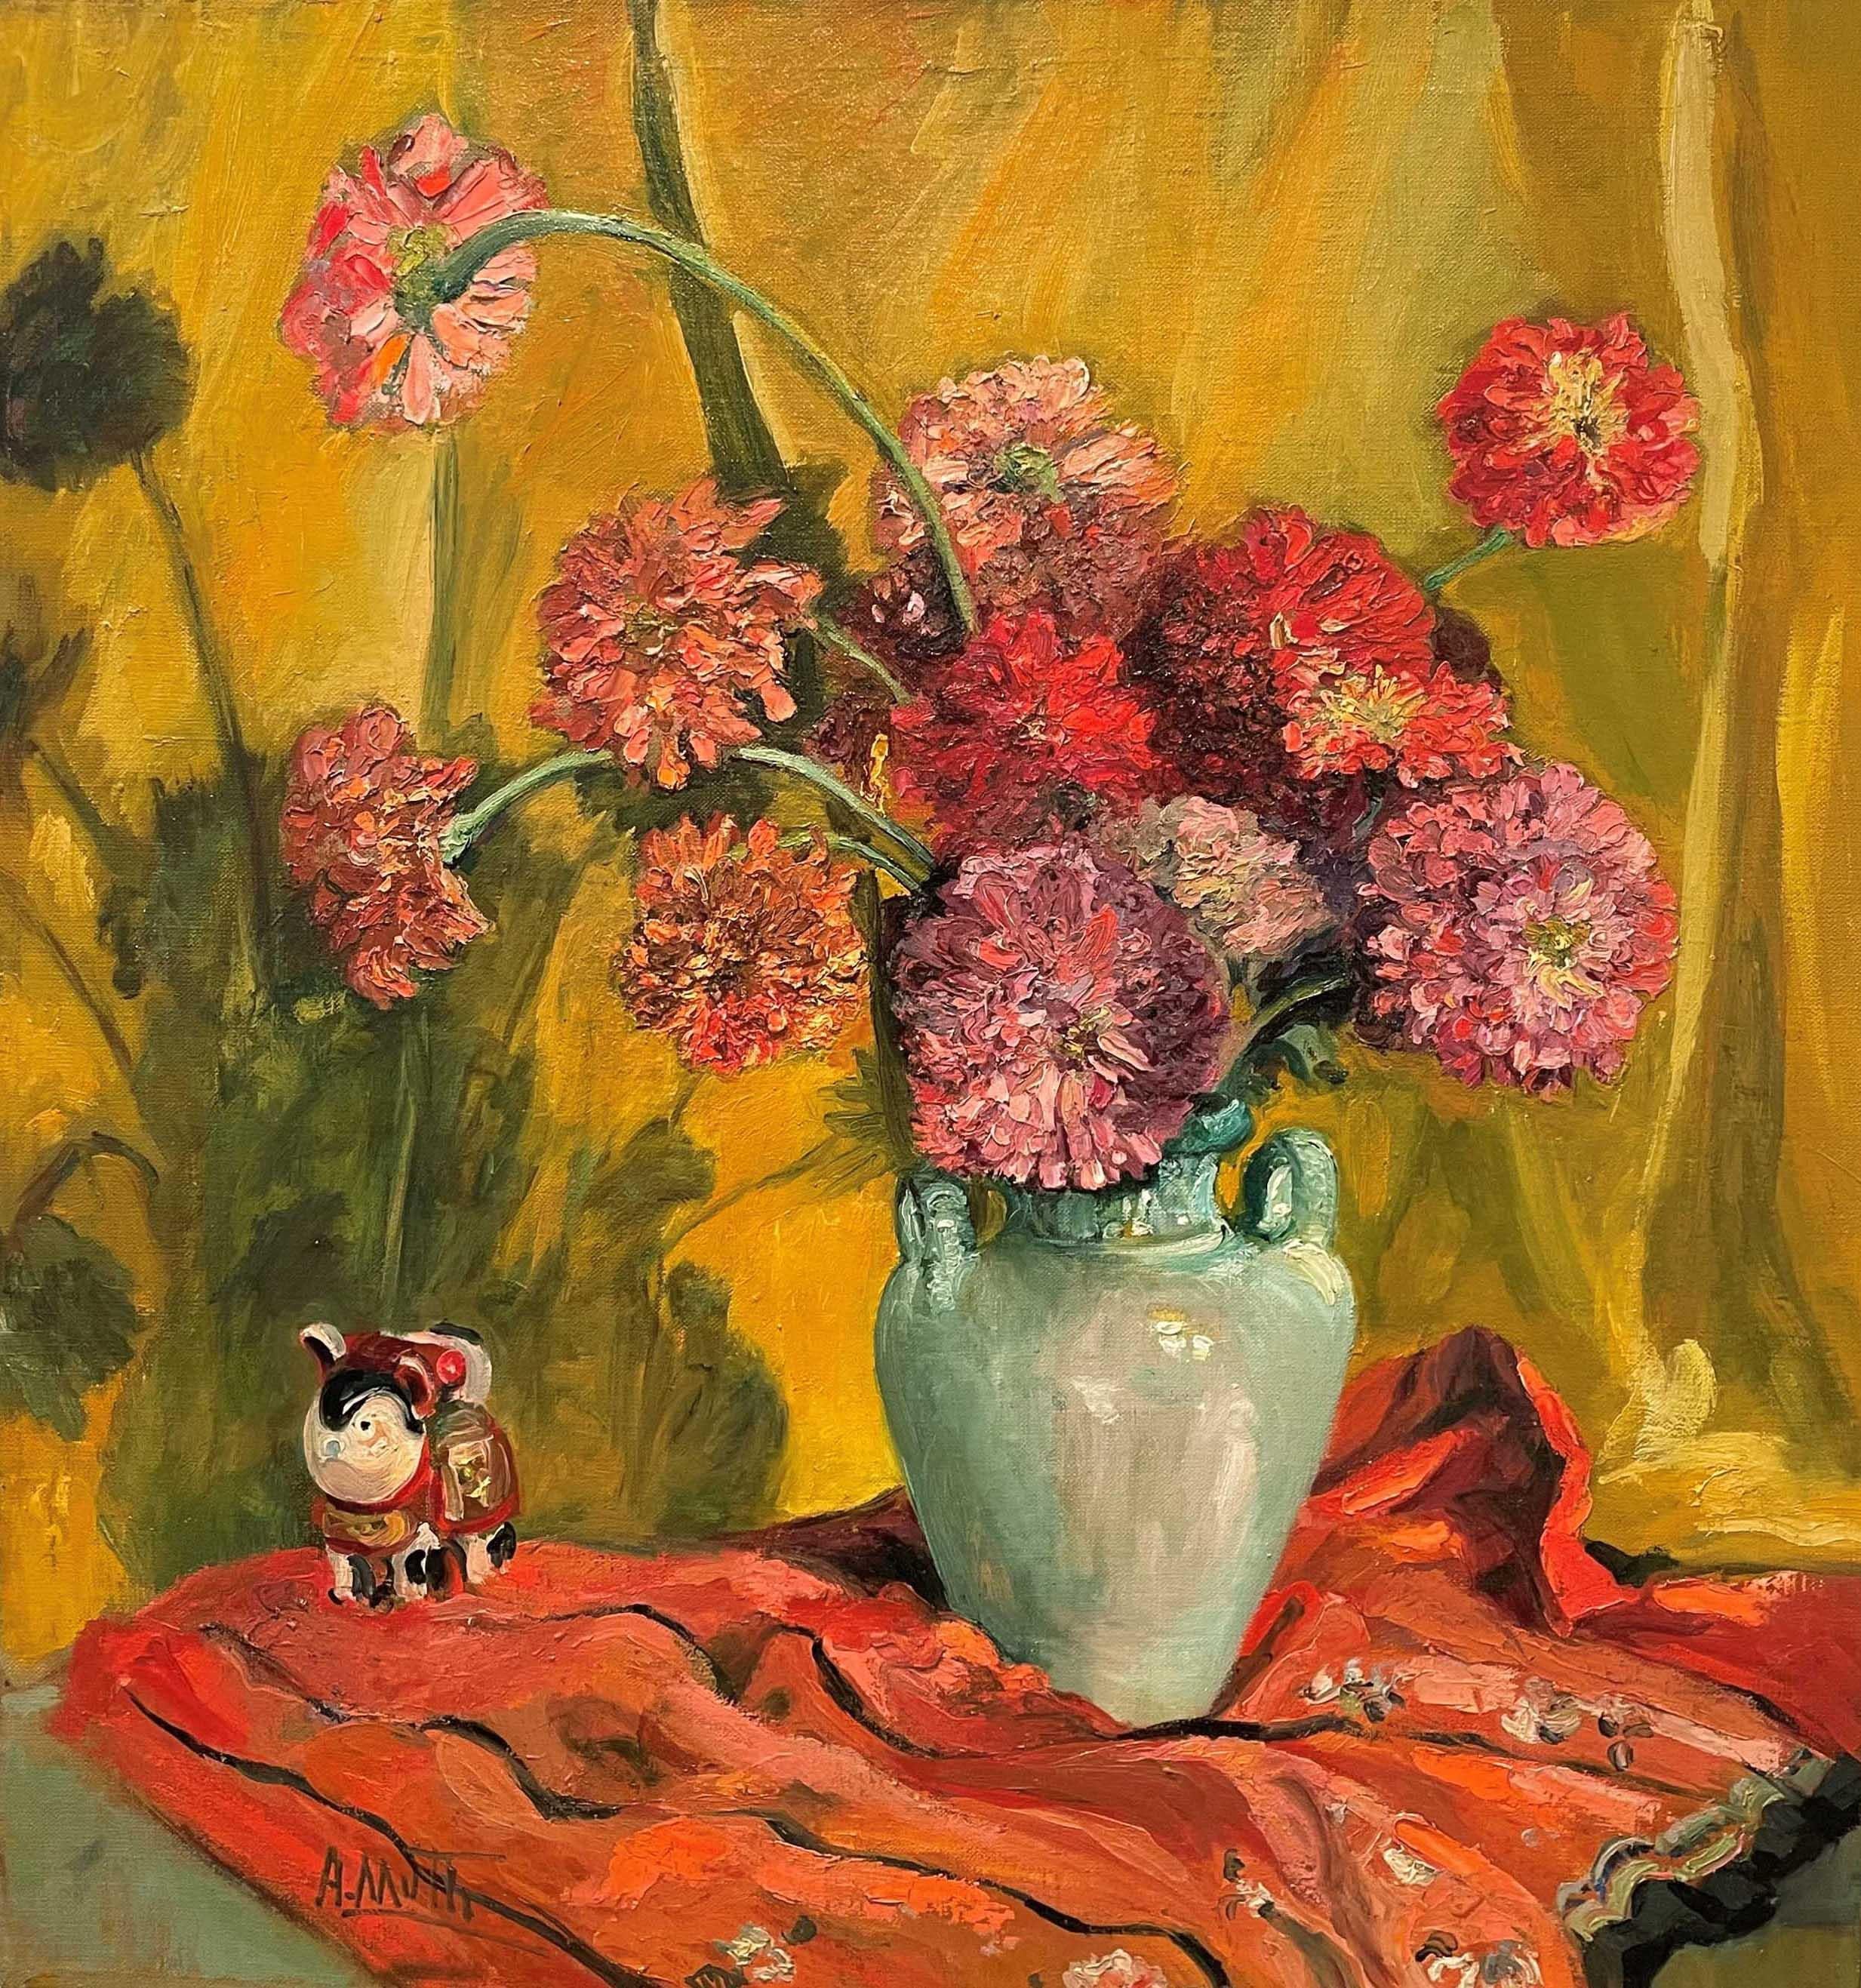 "Still-life of Oeillets and Figurine," by American artist Alice Lolita Muth is oil on canvas and measures 31 3/8 x 29 3/8 inches. The work is signed by the artist at the lower left.

Alice Lolita Muth was born Alice Helen Muth in Cincinnati, Ohio on